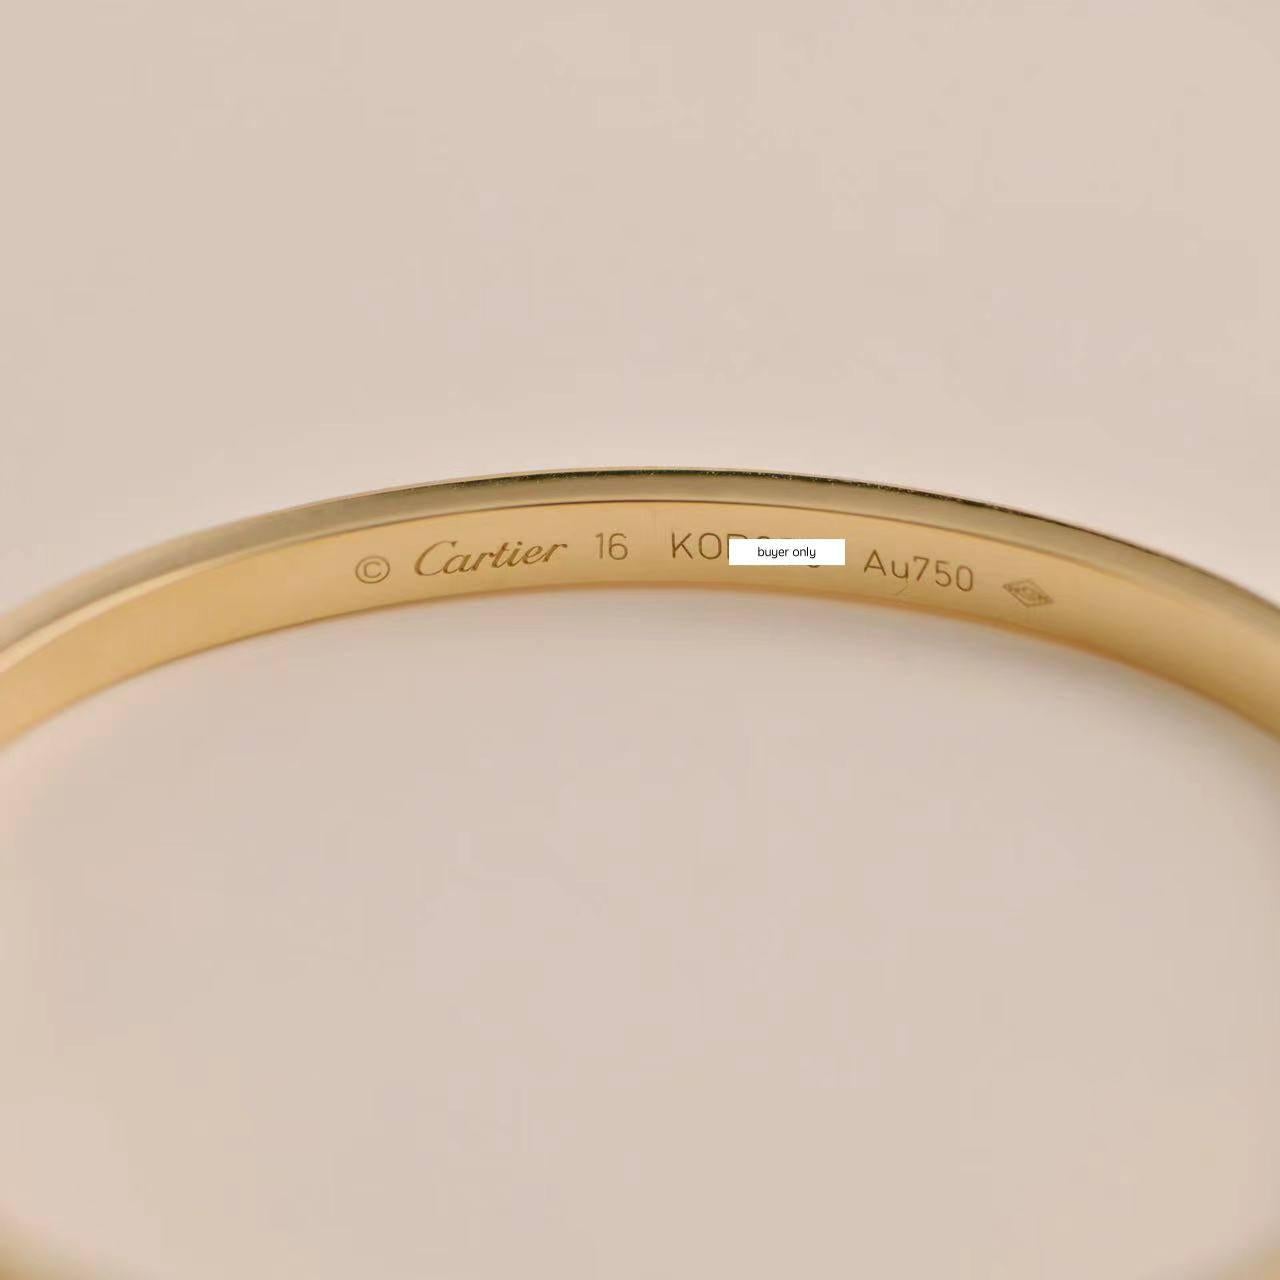 Cartier Love Bracelet Small Model 18K Yellow Gold Size 16 For Sale 3